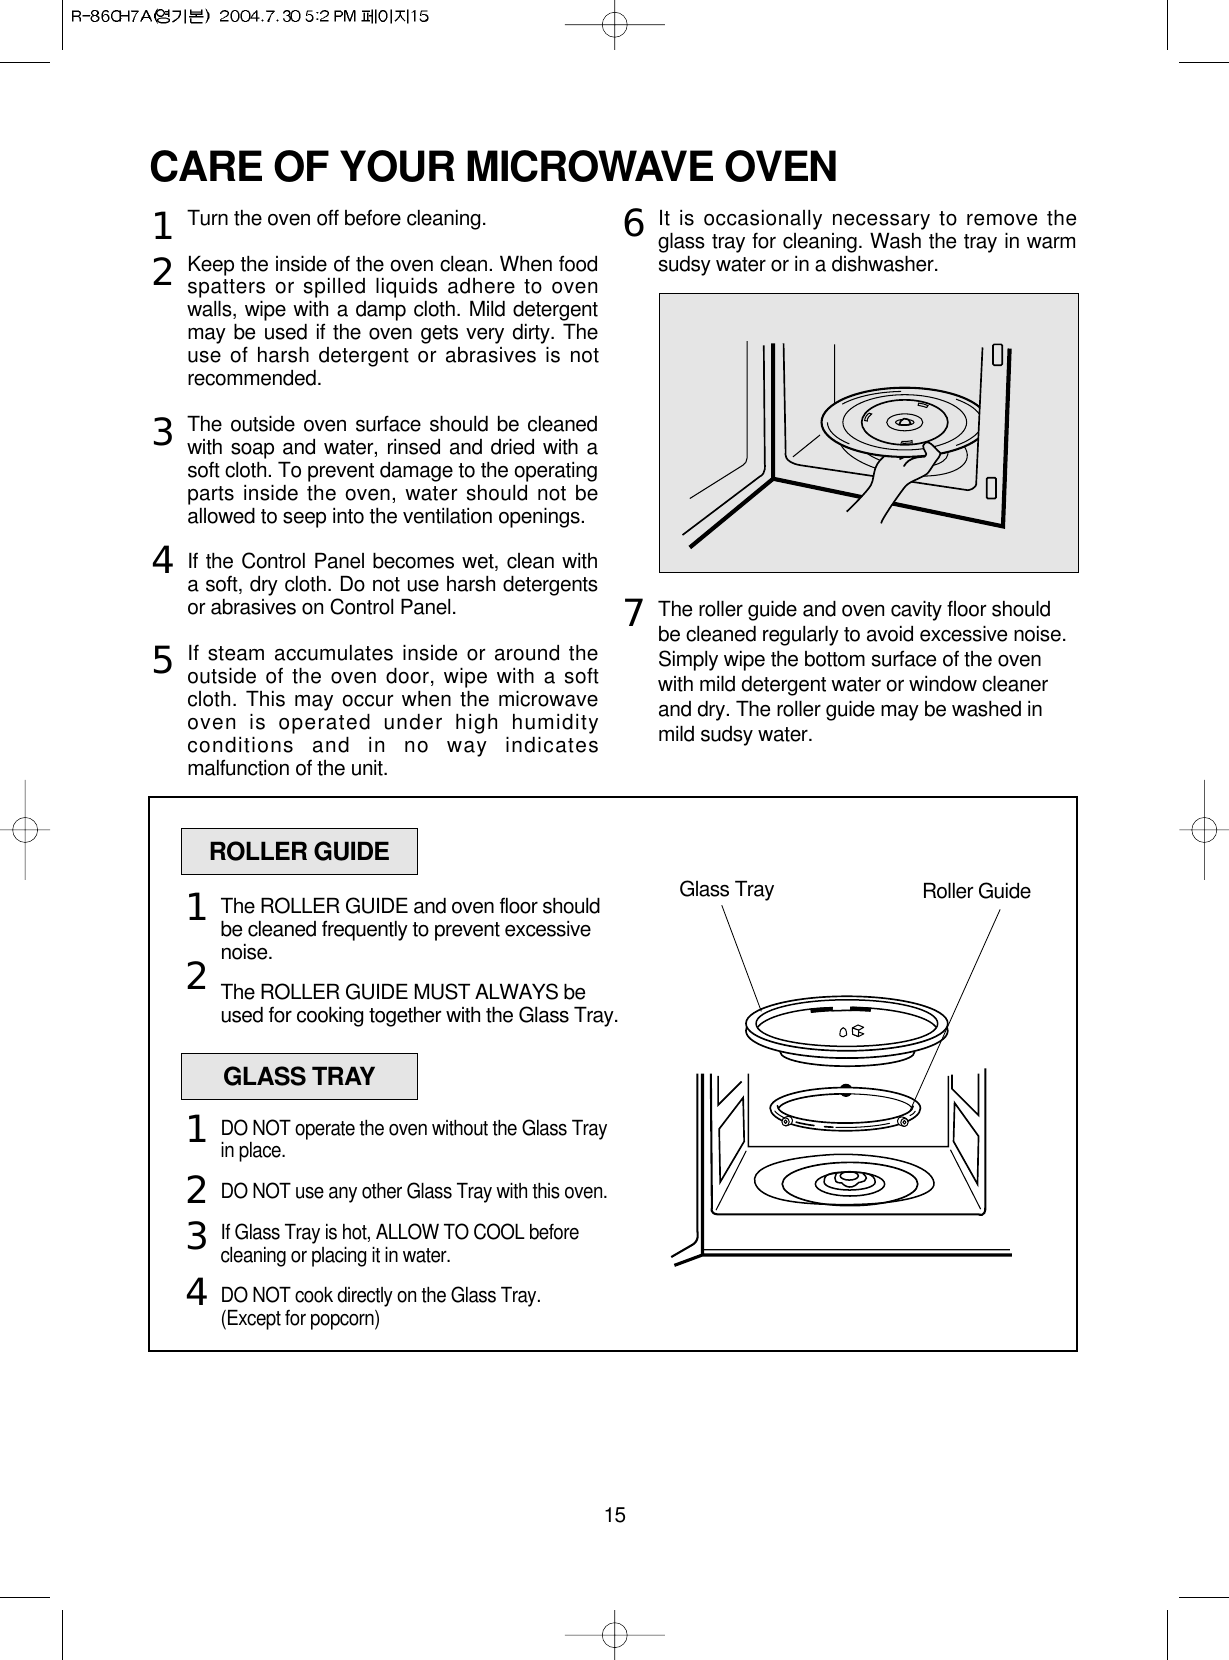 15CARE OF YOUR MICROWAVE OVENTurn the oven off before cleaning.Keep the inside of the oven clean. When foodspatters or spilled liquids adhere to ovenwalls, wipe with a damp cloth. Mild detergentmay be used if the oven gets very dirty. Theuse of harsh detergent or abrasives is notrecommended.The outside oven surface should be cleanedwith soap and water, rinsed and dried with asoft cloth. To prevent damage to the operatingparts inside the oven, water should not beallowed to seep into the ventilation openings.If the Control Panel becomes wet, clean witha soft, dry cloth. Do not use harsh detergentsor abrasives on Control Panel.If steam accumulates inside or around theoutside of the oven door, wipe with a softcloth. This may occur when the microwaveoven is operated under high humidityconditions and in no way indicatesmalfunction of the unit.It is occasionally necessary to remove theglass tray for cleaning. Wash the tray in warmsudsy water or in a dishwasher.The roller guide and oven cavity floor shouldbe cleaned regularly to avoid excessive noise. Simply wipe the bottom surface of the ovenwith mild detergent water or window cleanerand dry. The roller guide may be washed inmild sudsy water.1234567ROLLER GUIDEGlass Tray Roller GuideThe ROLLER GUIDE and oven floor shouldbe cleaned frequently to prevent excessivenoise.The ROLLER GUIDE MUST ALWAYS beused for cooking together with the Glass Tray.12GLASS TRAYDO NOT operate the oven without the Glass Trayin place.DO NOT use any other Glass Tray with this oven.If Glass Tray is hot, ALLOW TO COOL beforecleaning or placing it in water.DO NOT cook directly on the Glass Tray.(Except for popcorn)1234